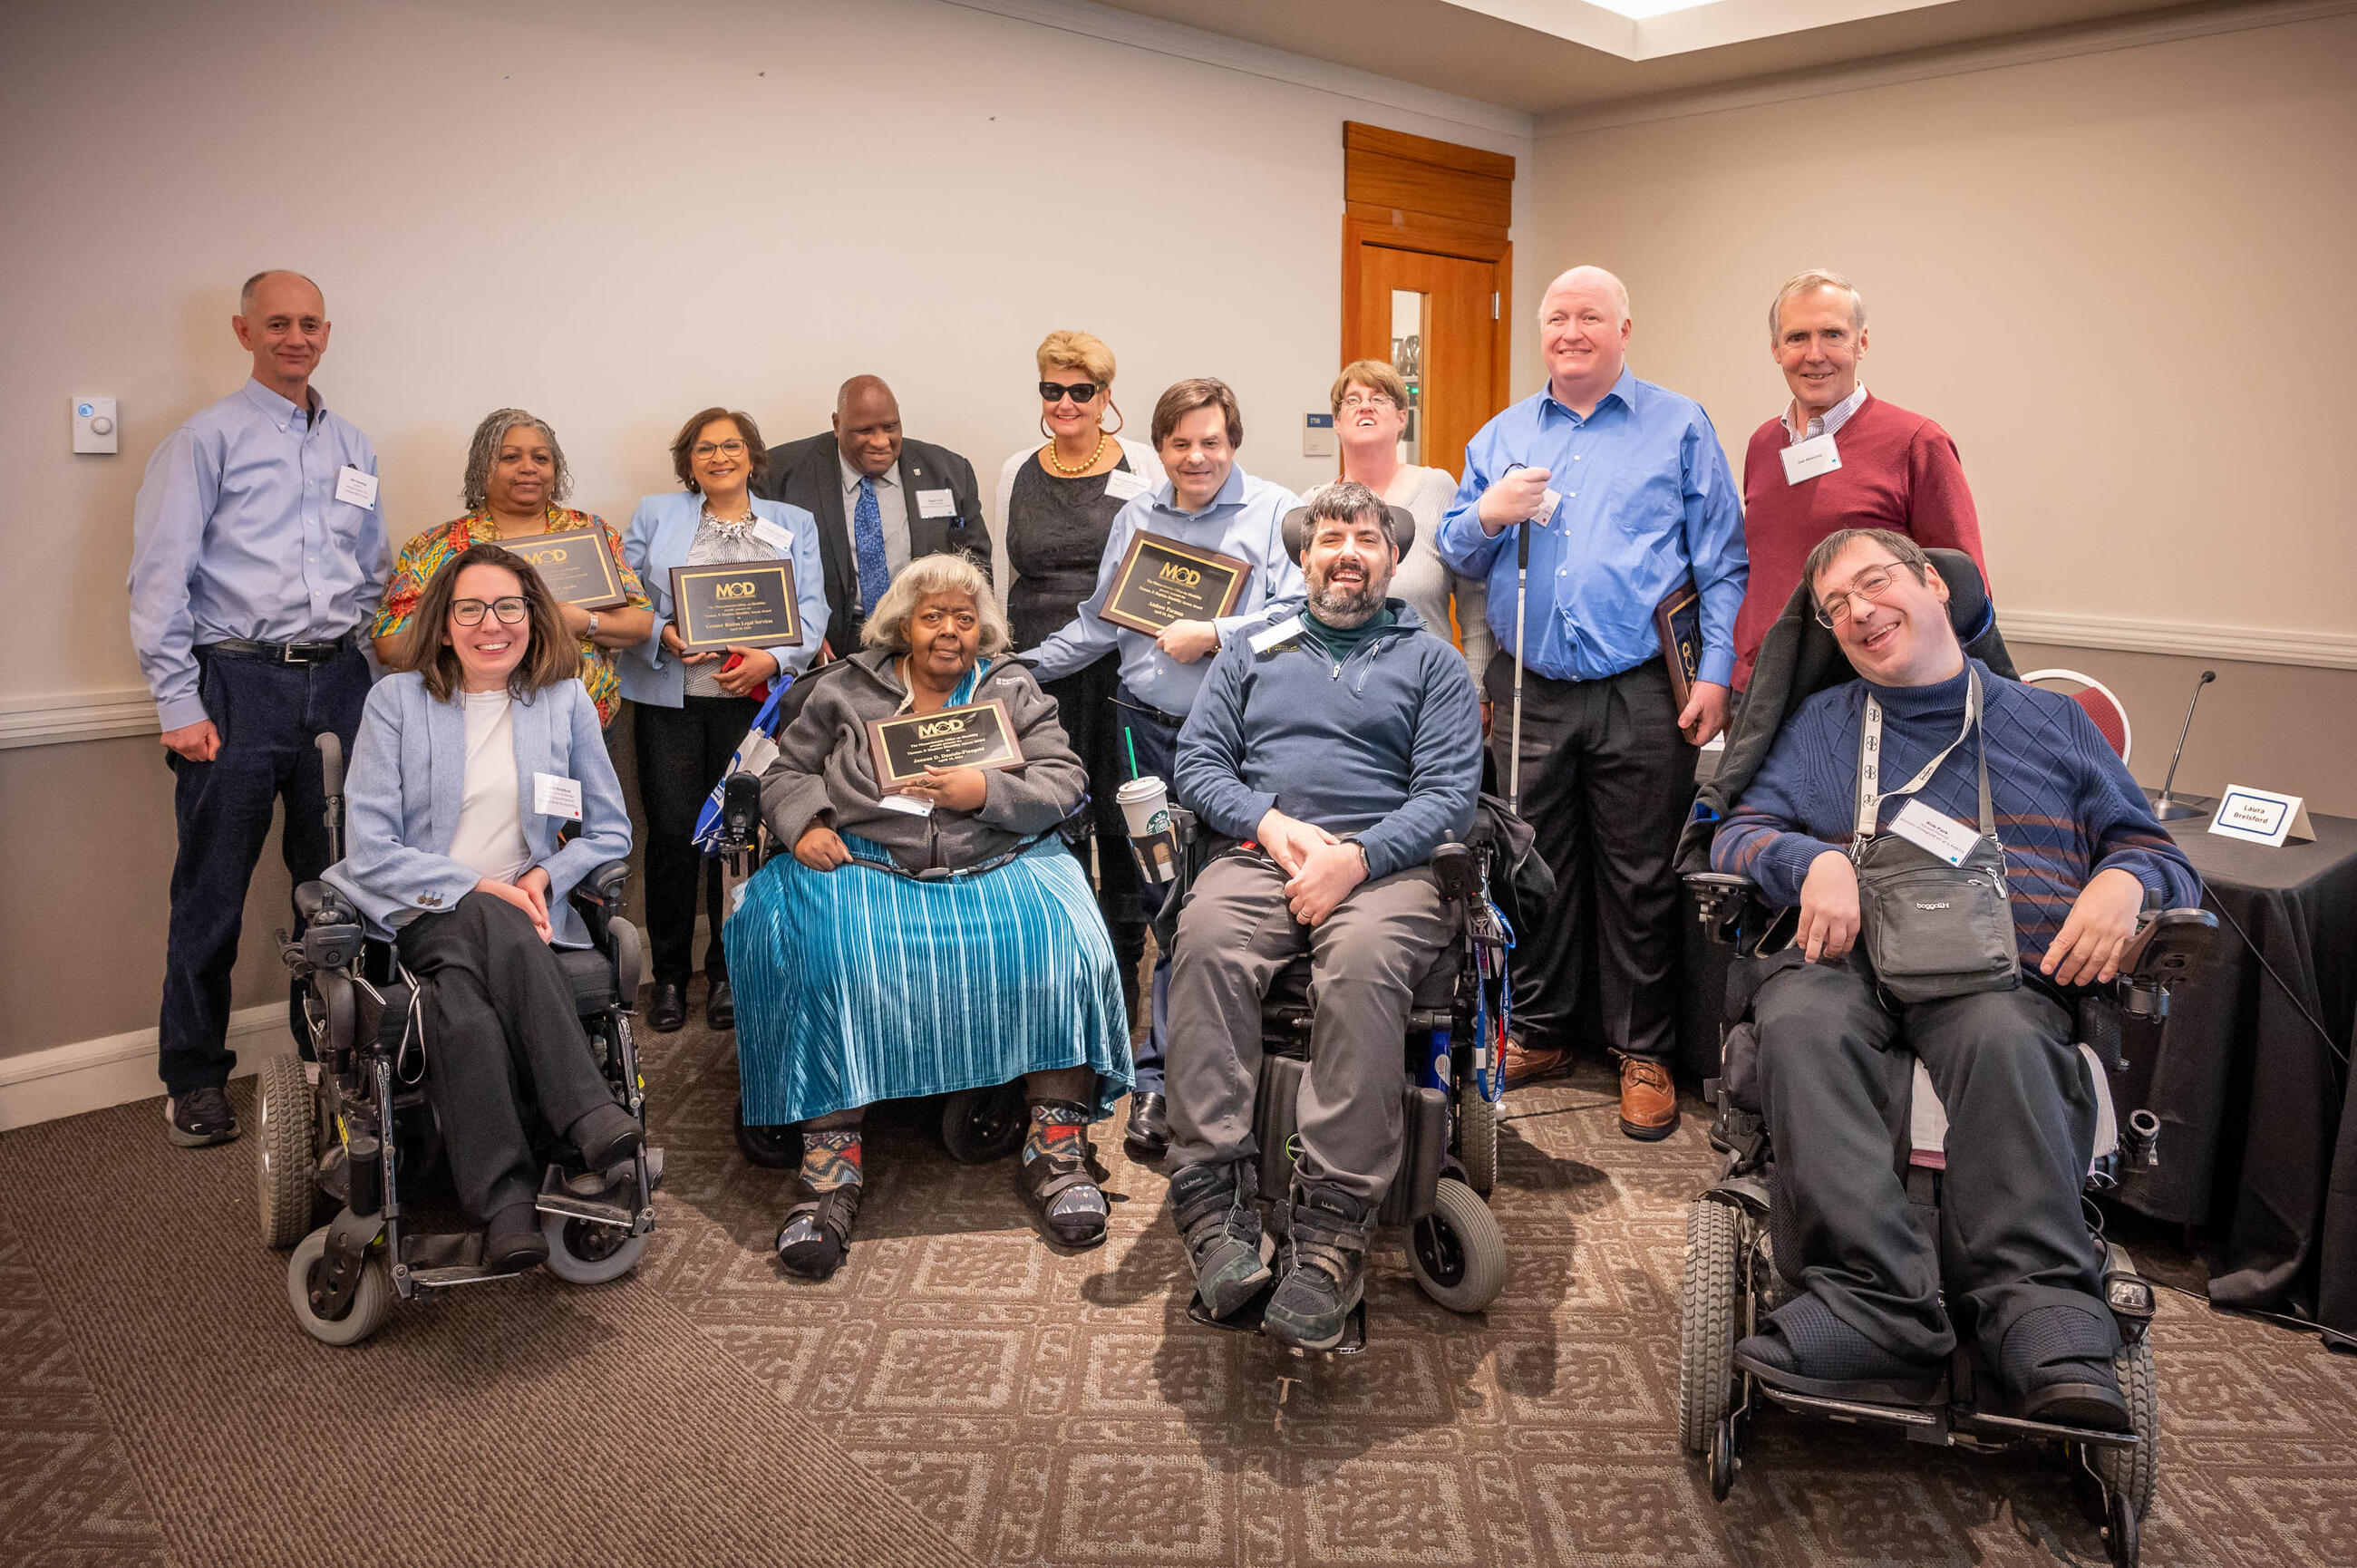 A group of people holding plaques with their awards for improving accessibility in Massachusetts.